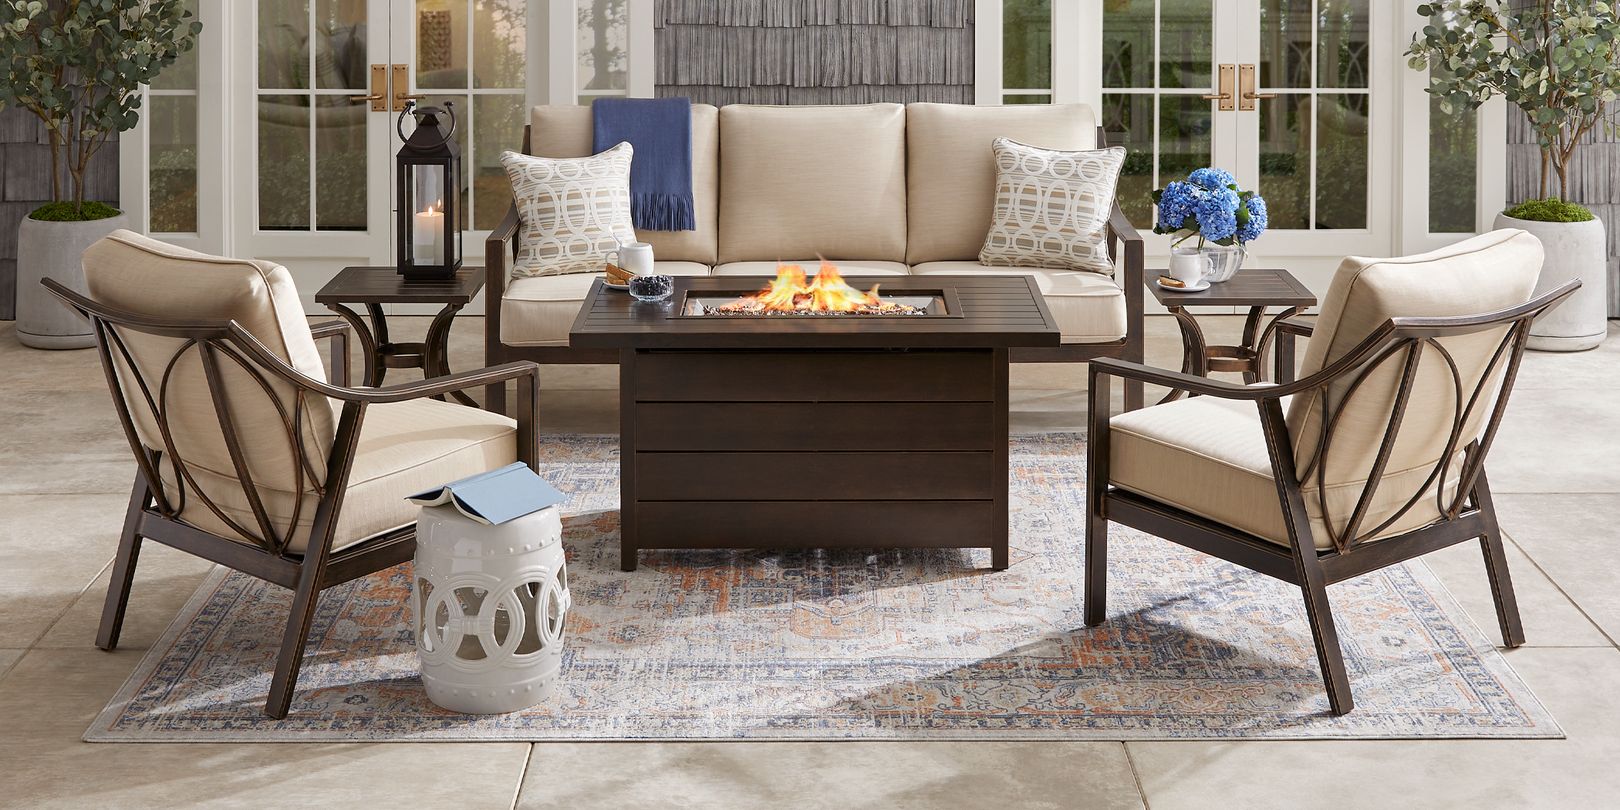 Fire pit seating set